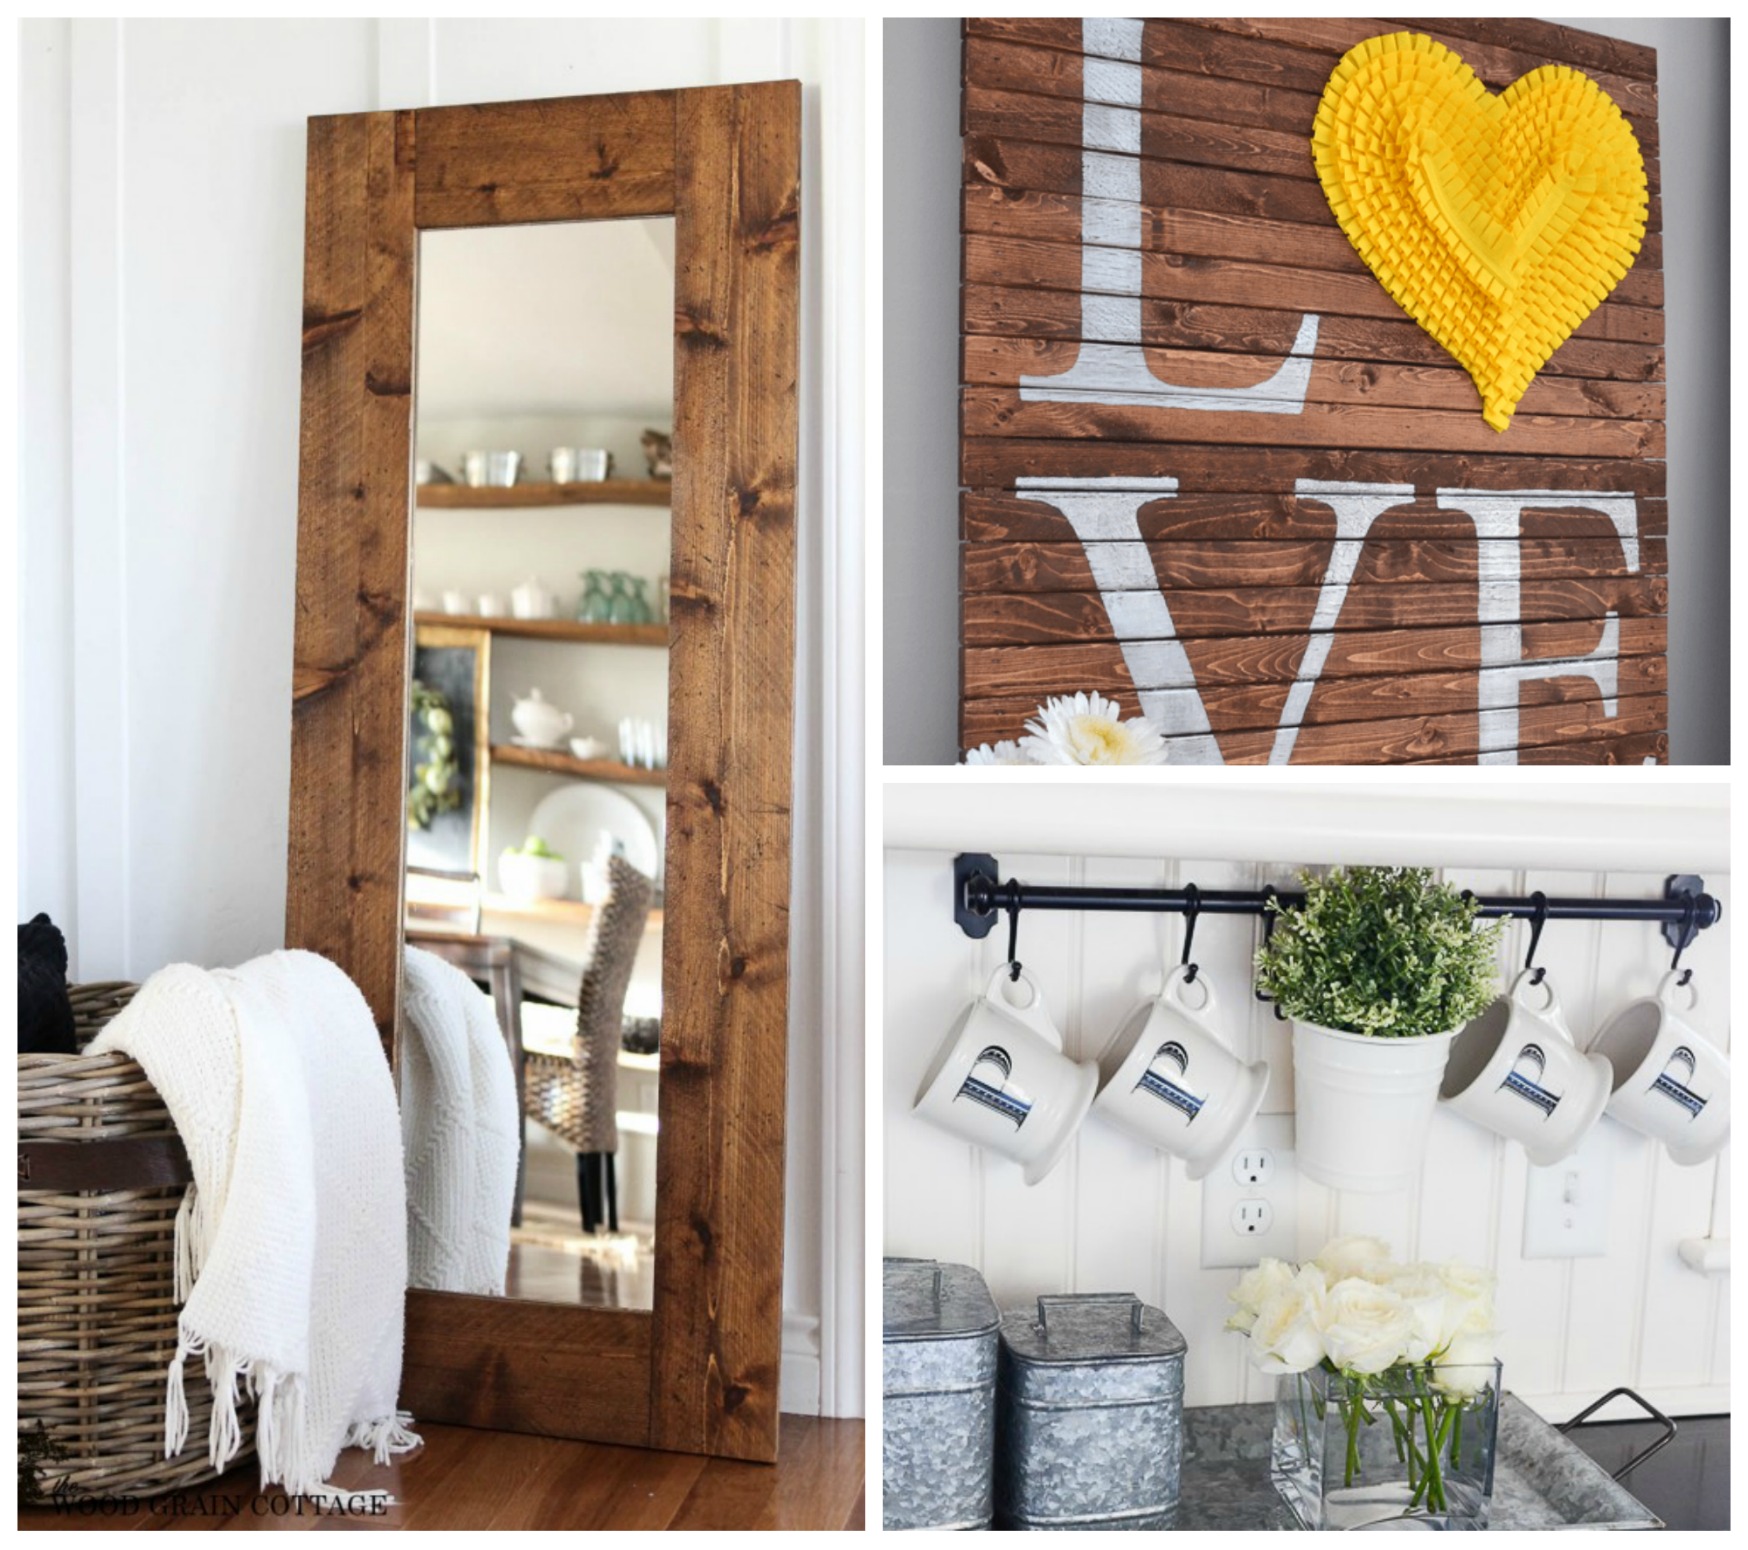 Upcycling For The Uplands: DIY Rustic Decor Projects